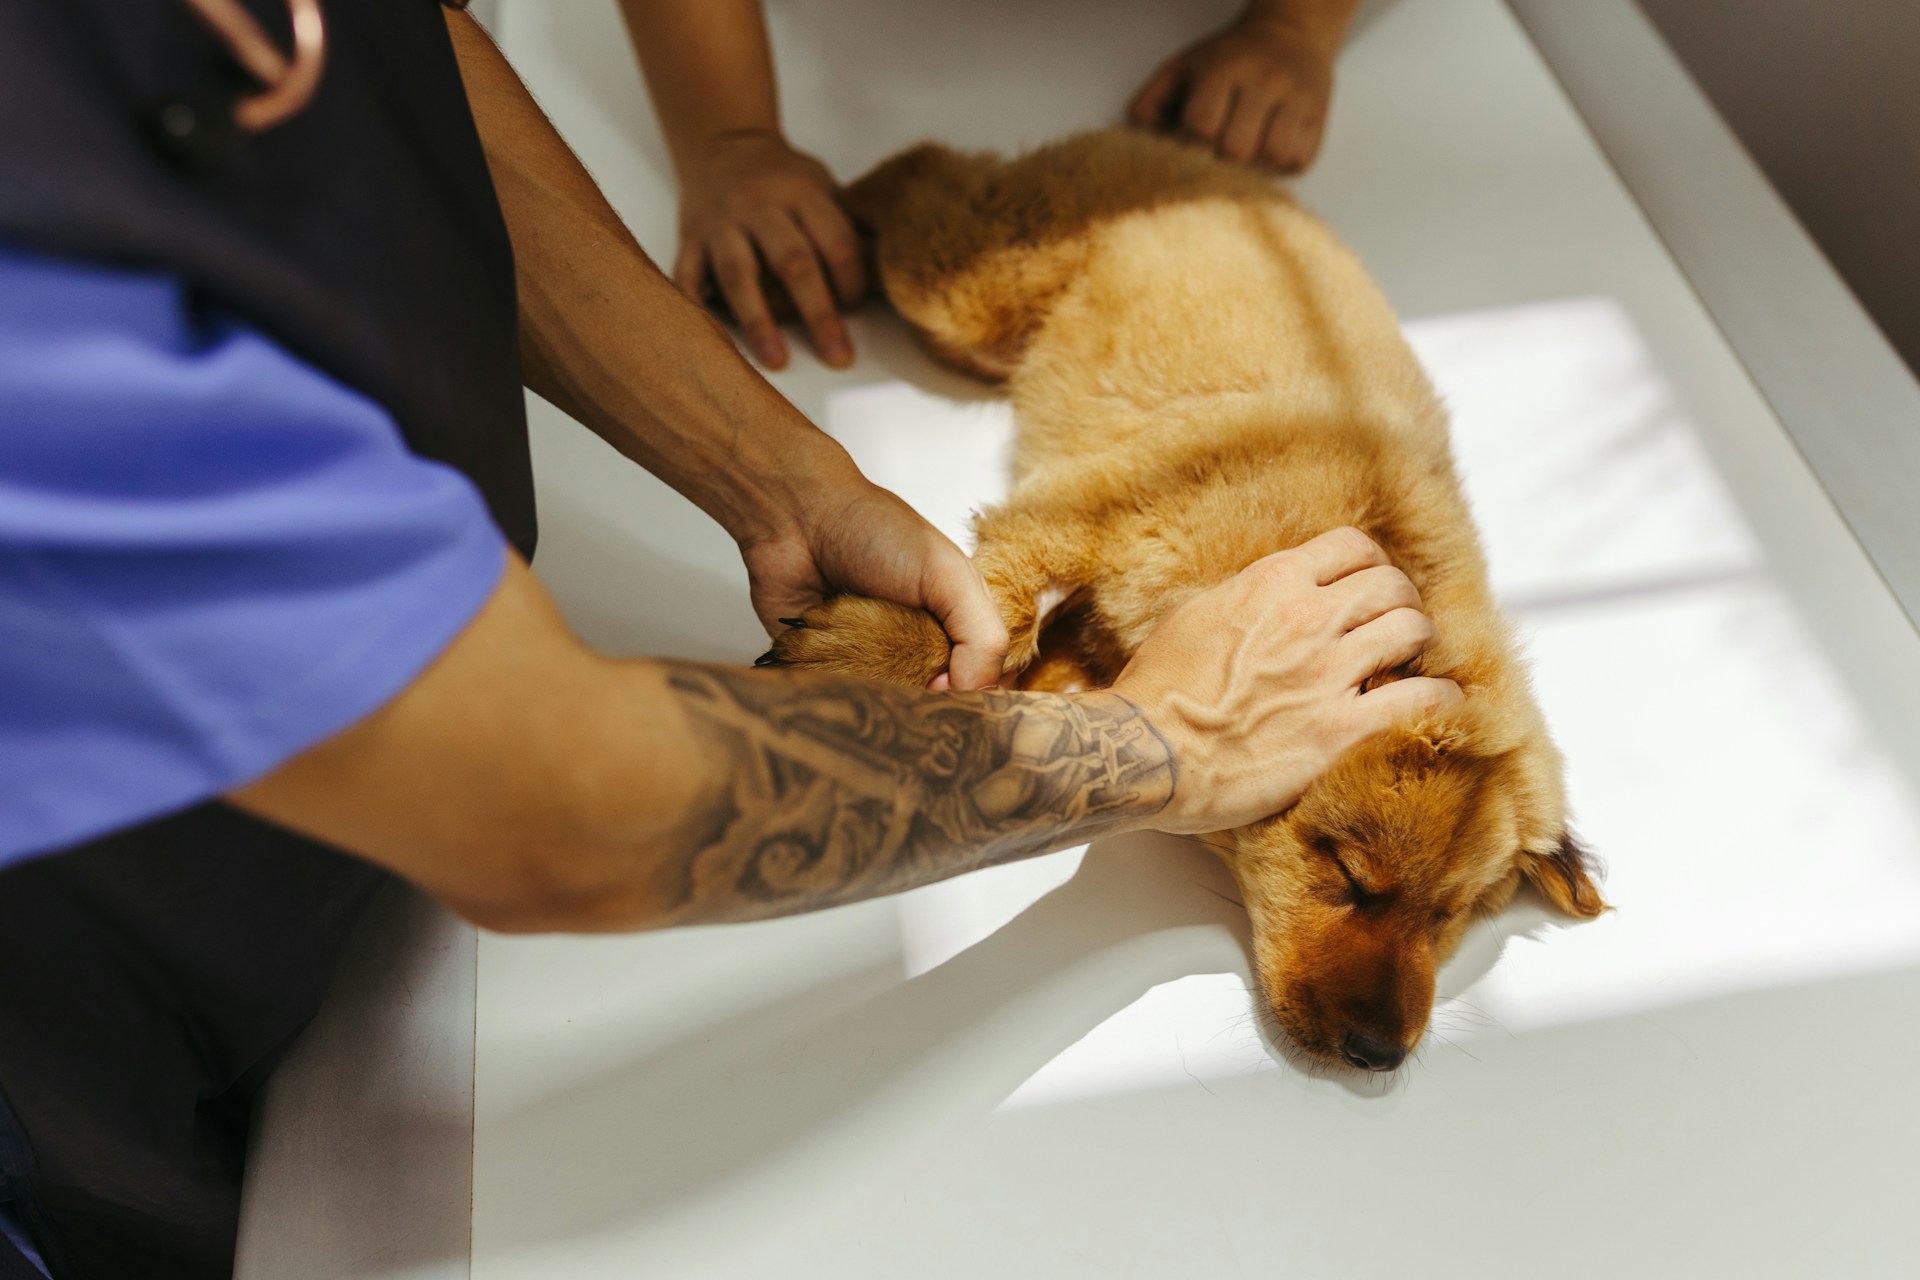 A vet checking up on a sick dog at a clinic